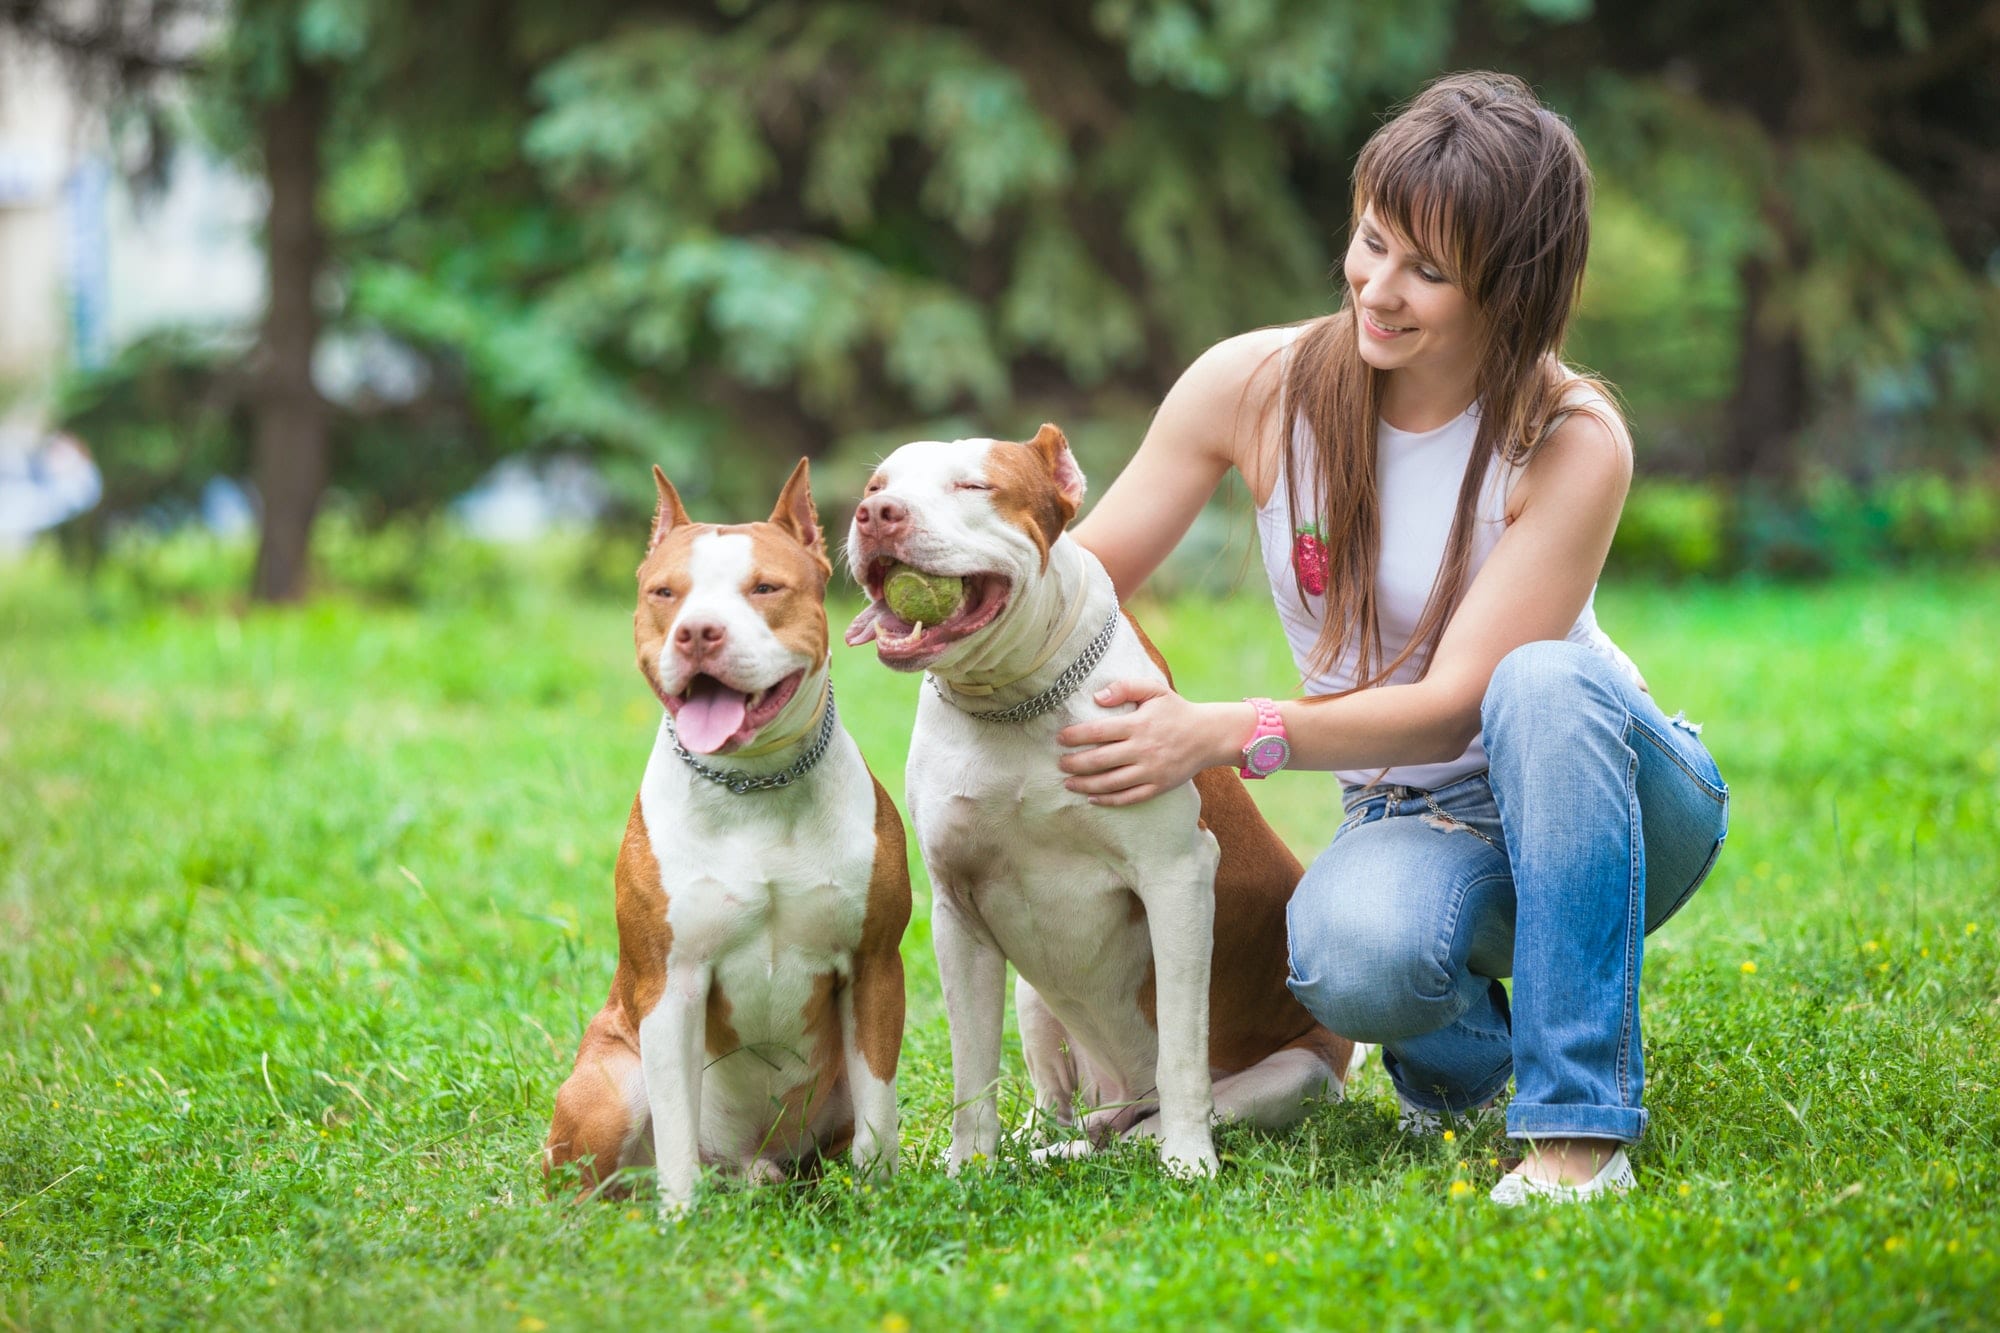 Charming lady posing with dogs outdoors